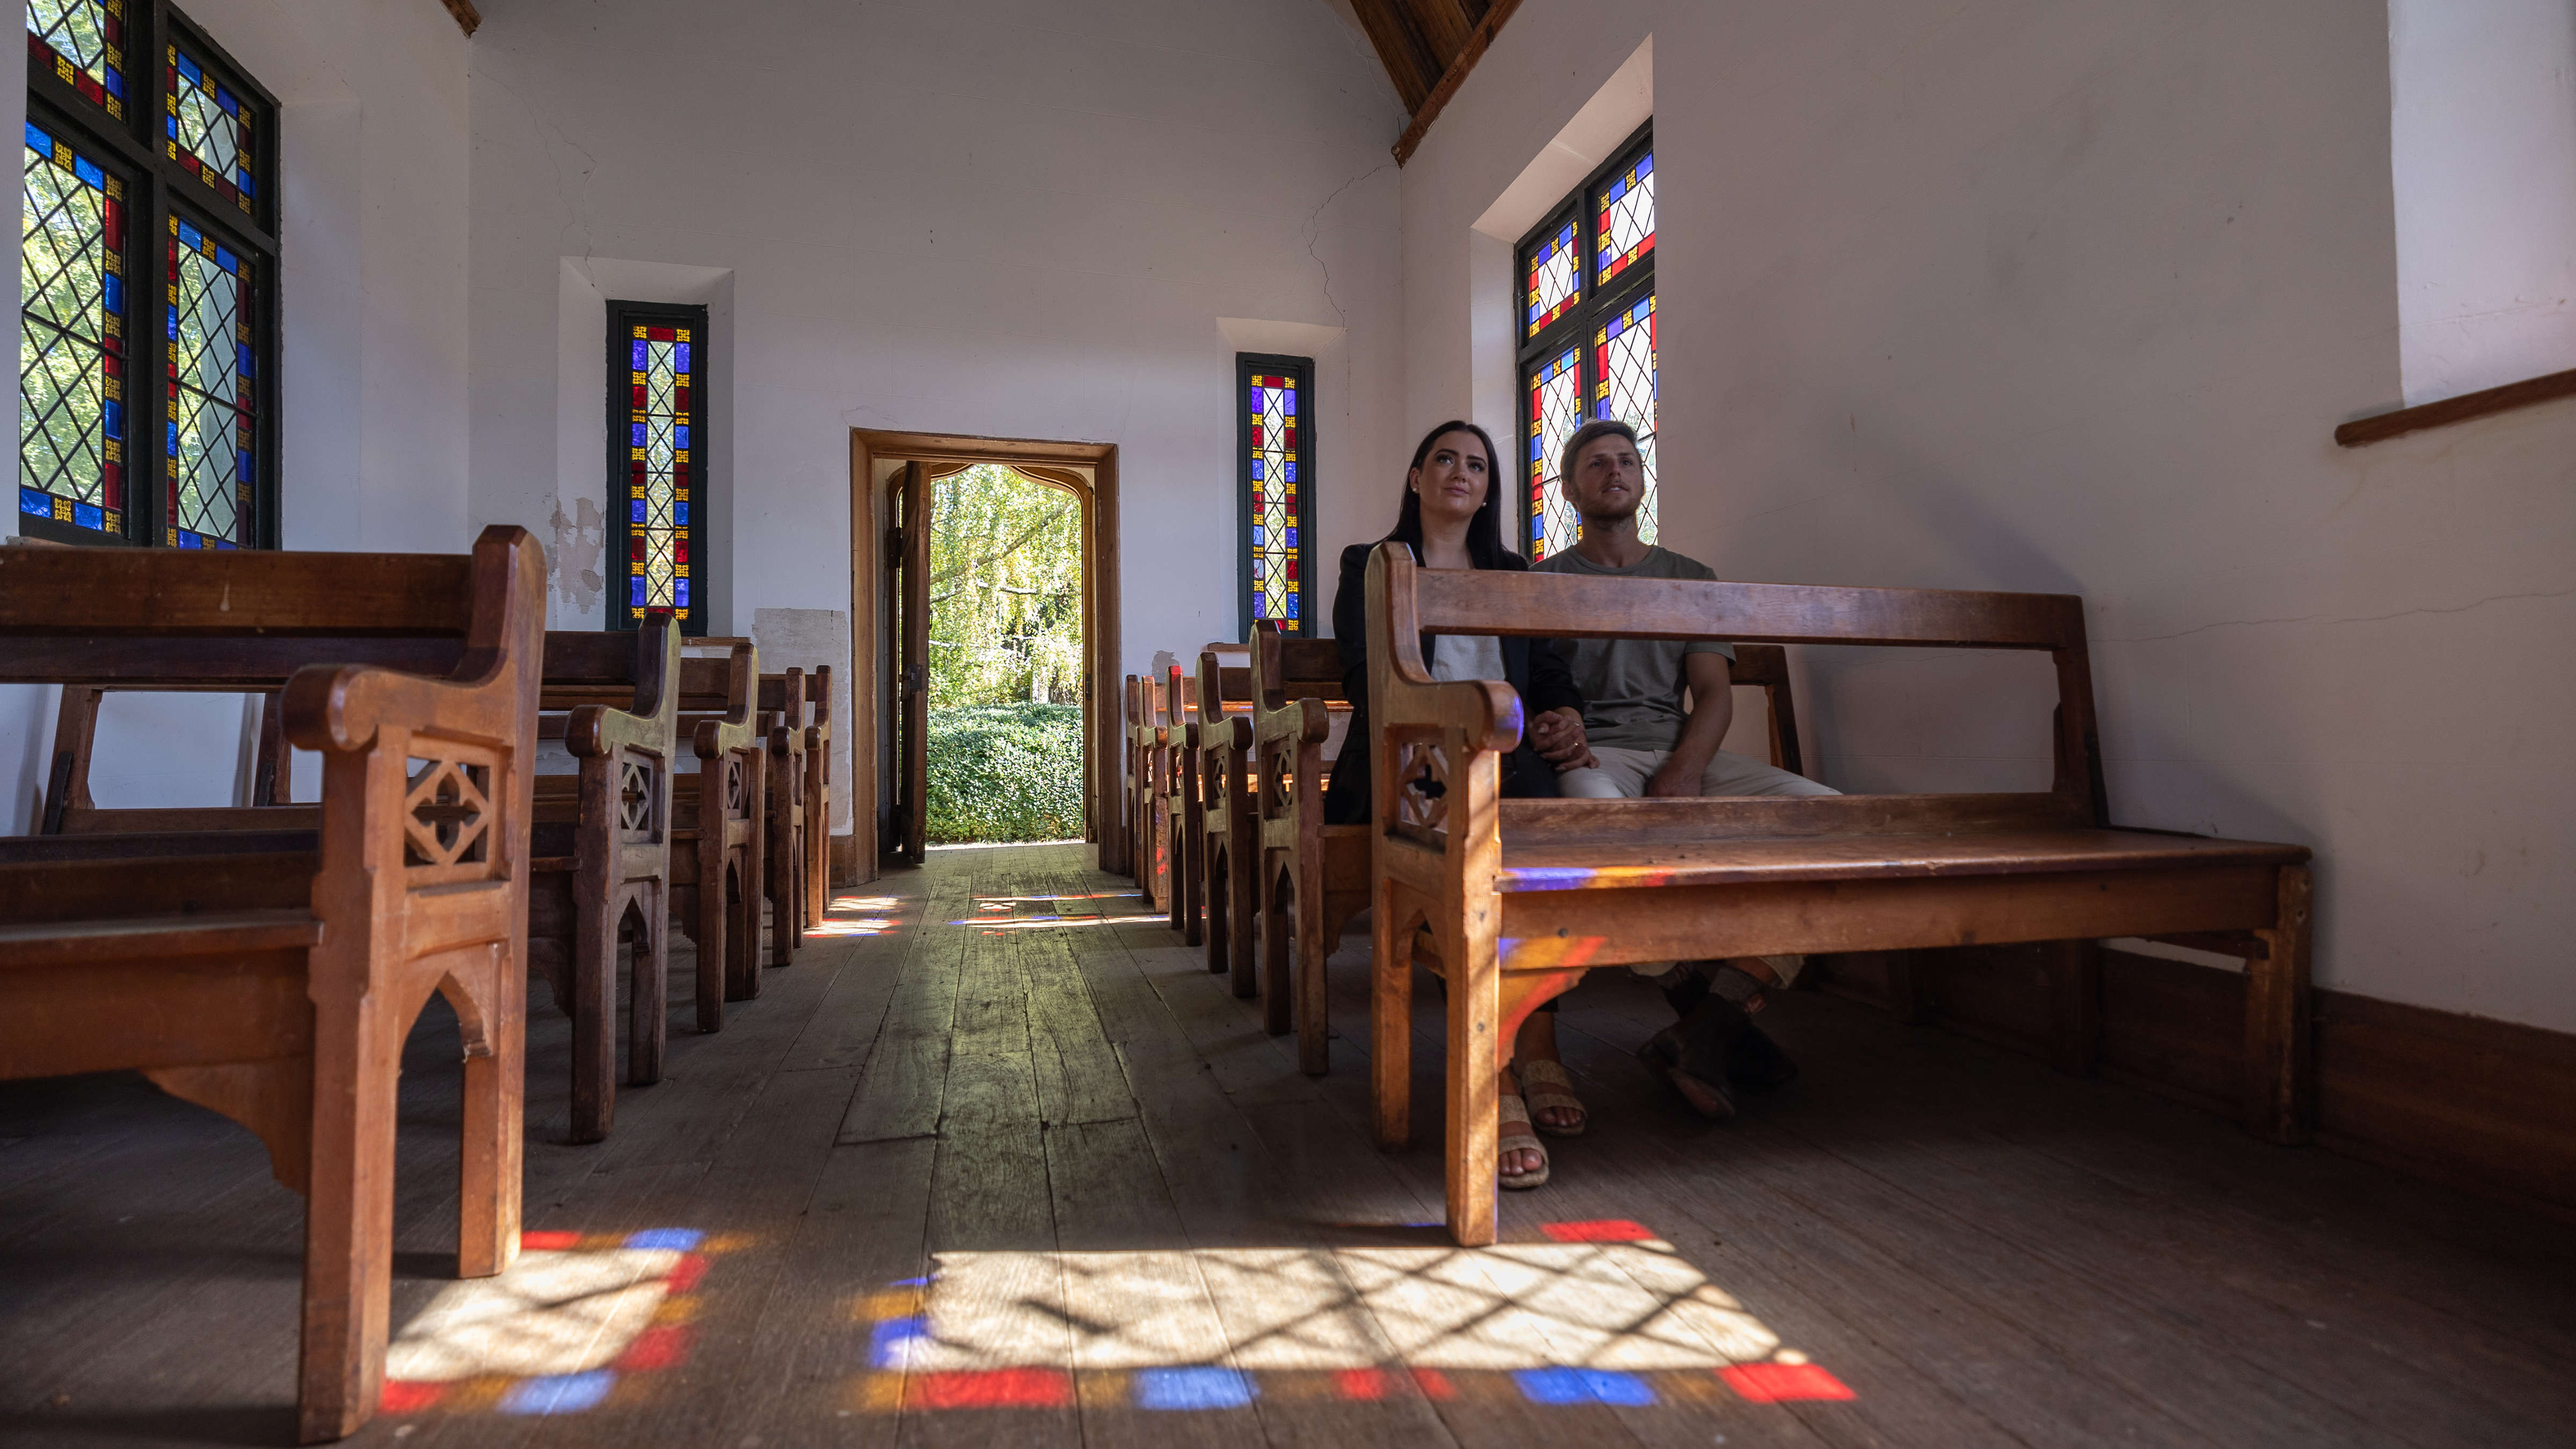 A couple sit on one of the huon pine pews in the Chapel circa 1850. The internal features include timber floor boards, white painted walls etched with stone blocks and a pine lined pitched ceiling.  The stained glass windows include blue, red and amber borders with diamond lead lighting. The sun coming through the windows cast coloured outlines on the floor. Photo: Kate von Stieglitz / Tourism Australia.